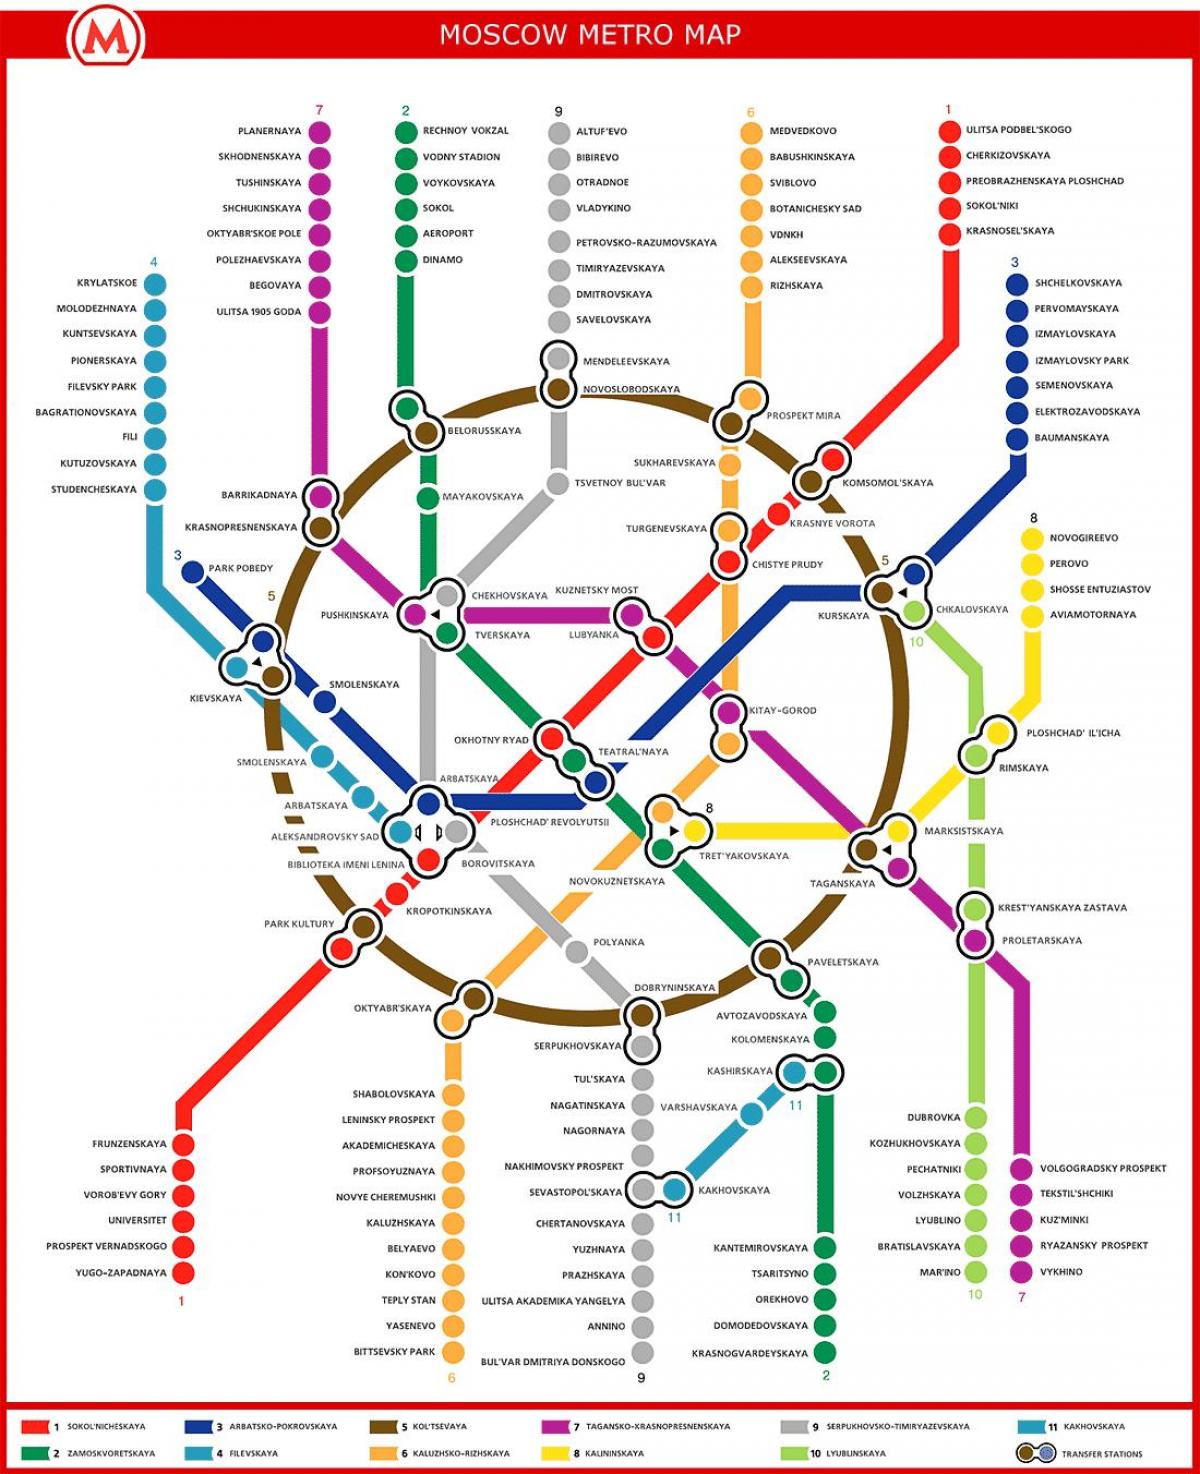 Moscow metro map in Russian